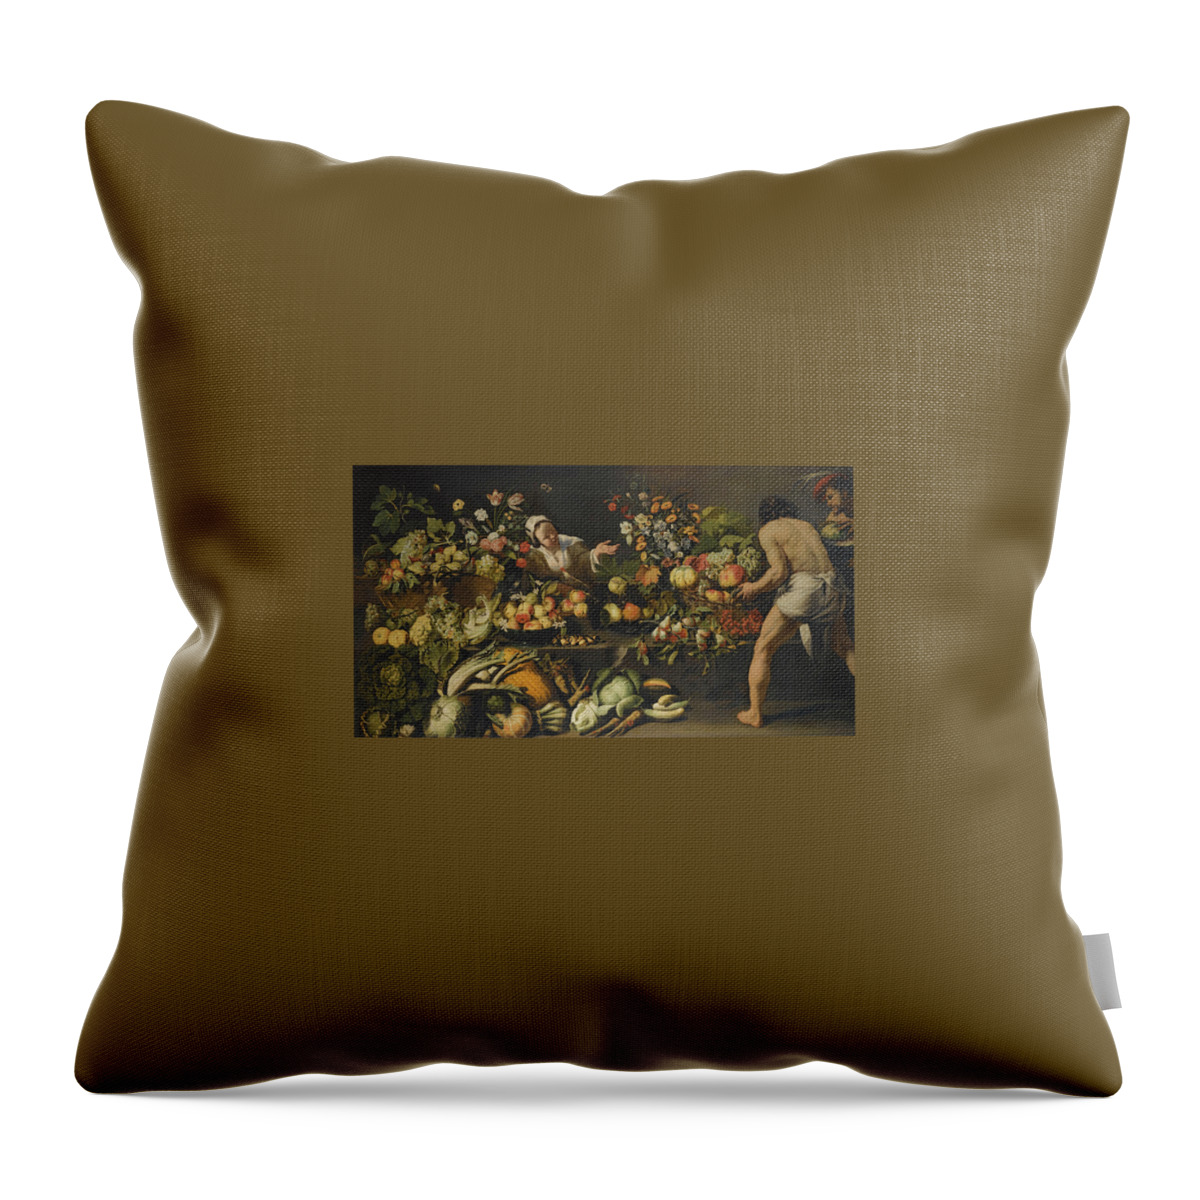 Italo - Flemish School Throw Pillow featuring the painting Vegetables And Flowers Arranged by MotionAge Designs